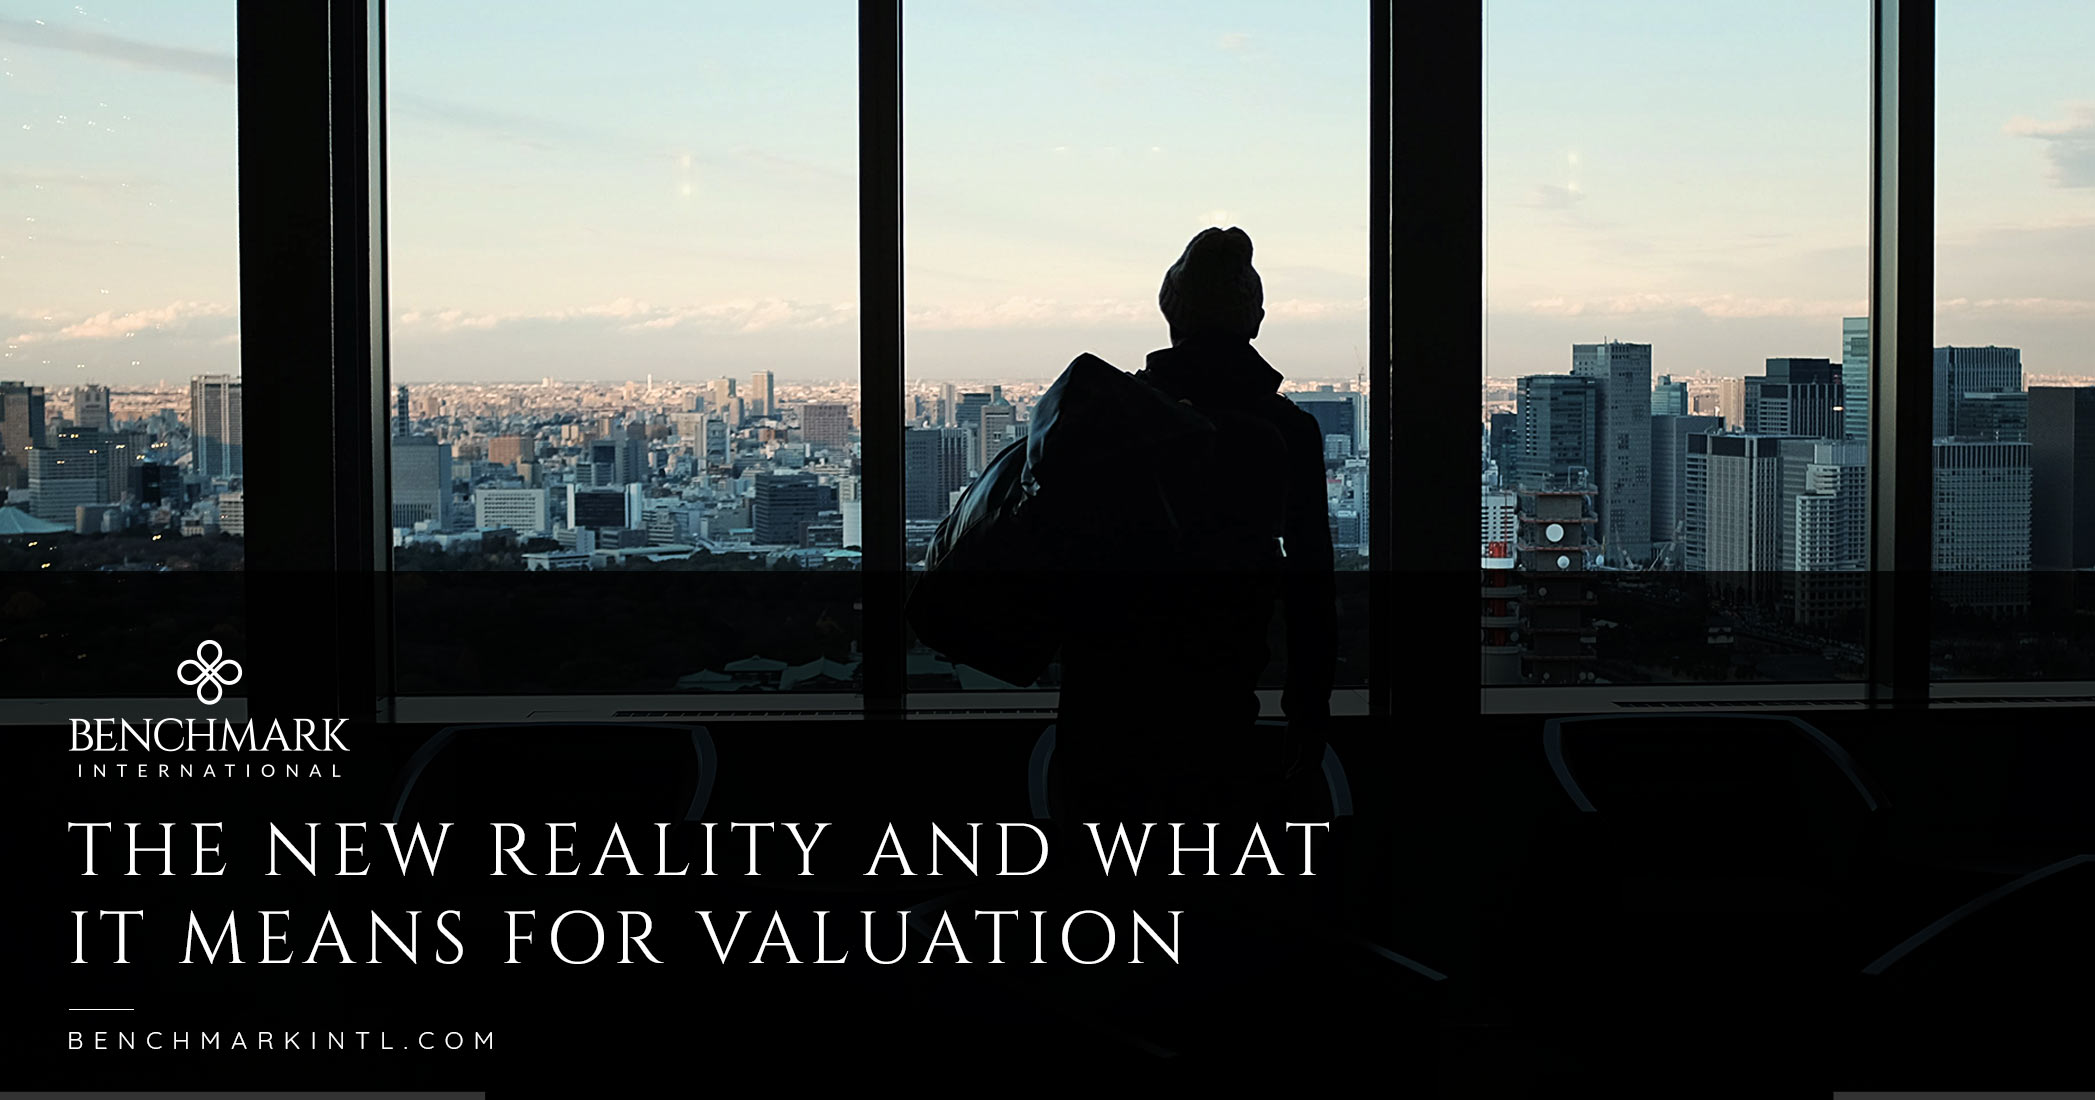 The New Reality and What it Means for Valuation